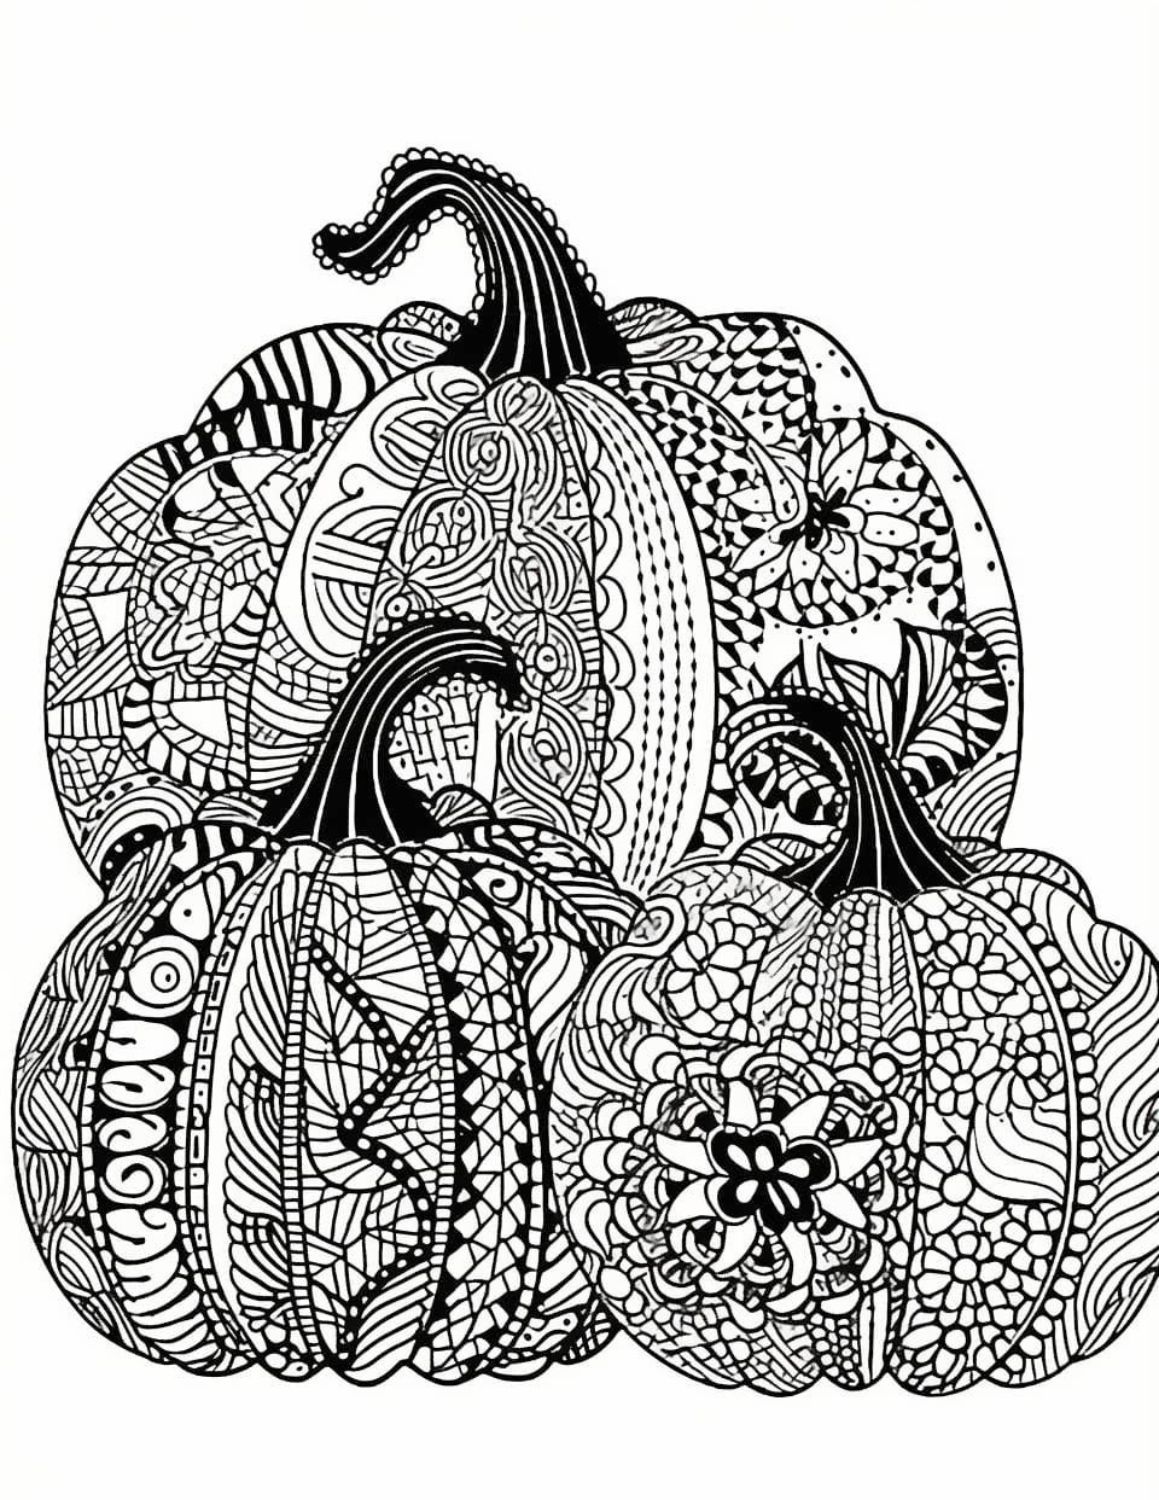 Pumpkin coloring pages for kids and adults